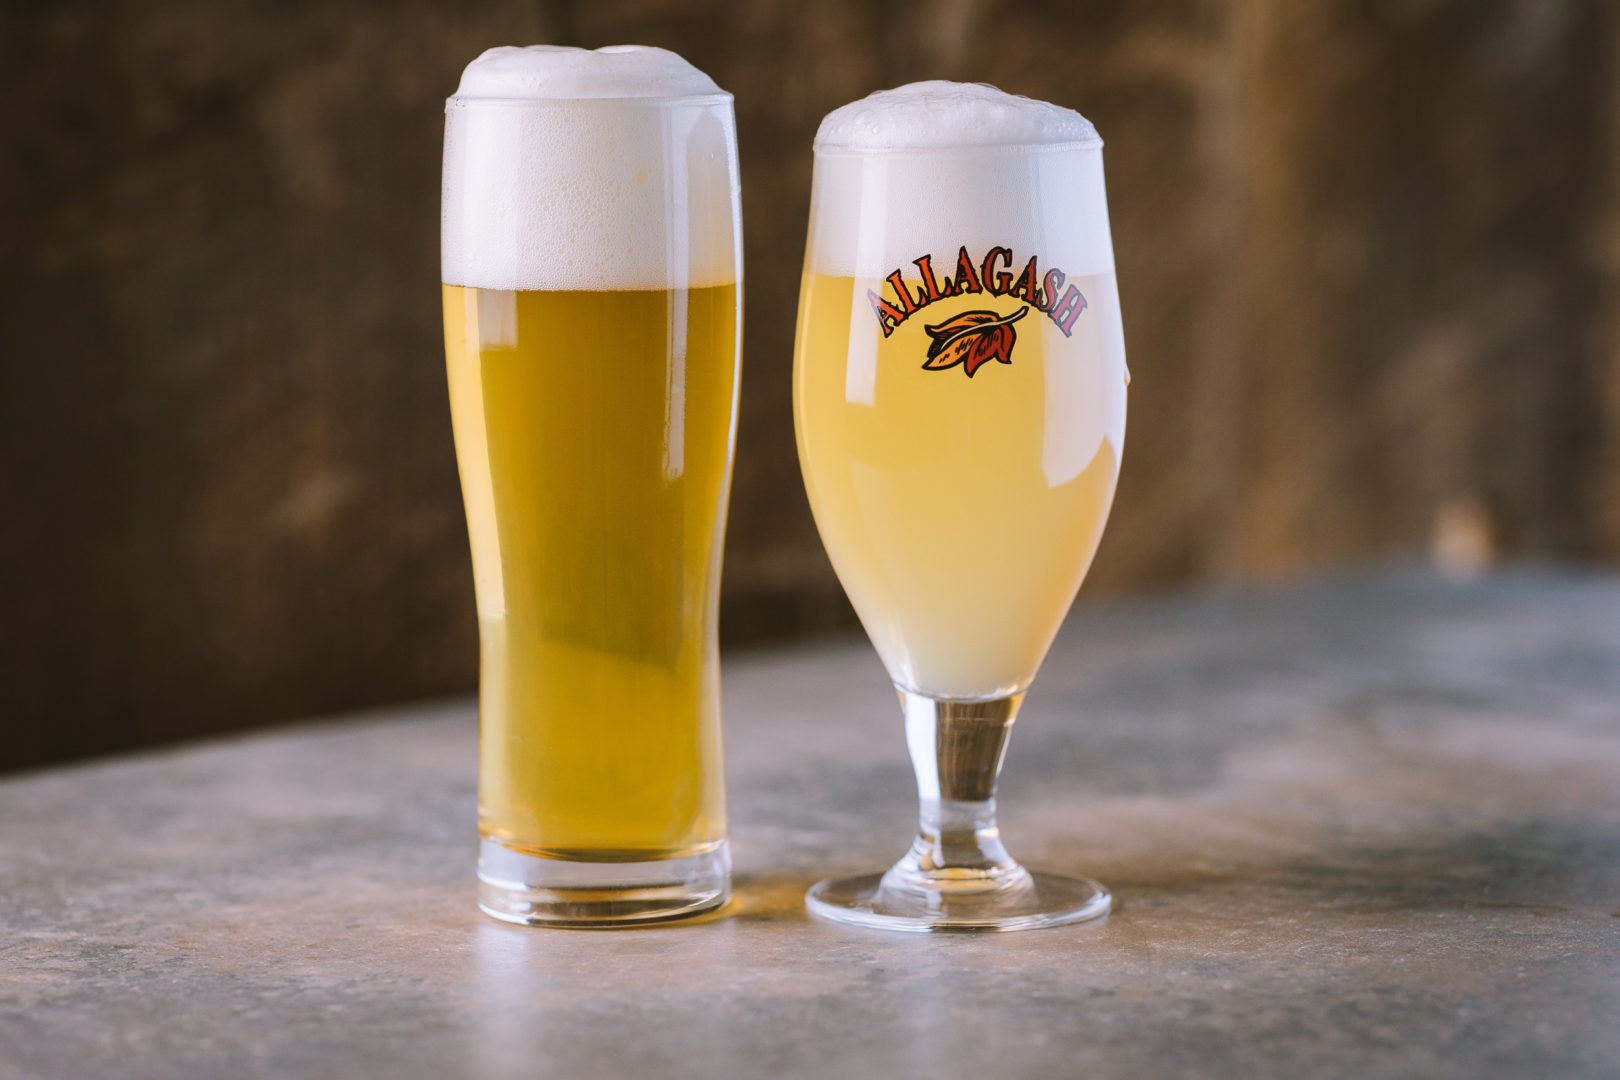 Ale vs. Lager - what's the difference? - Allagash Brewing Company